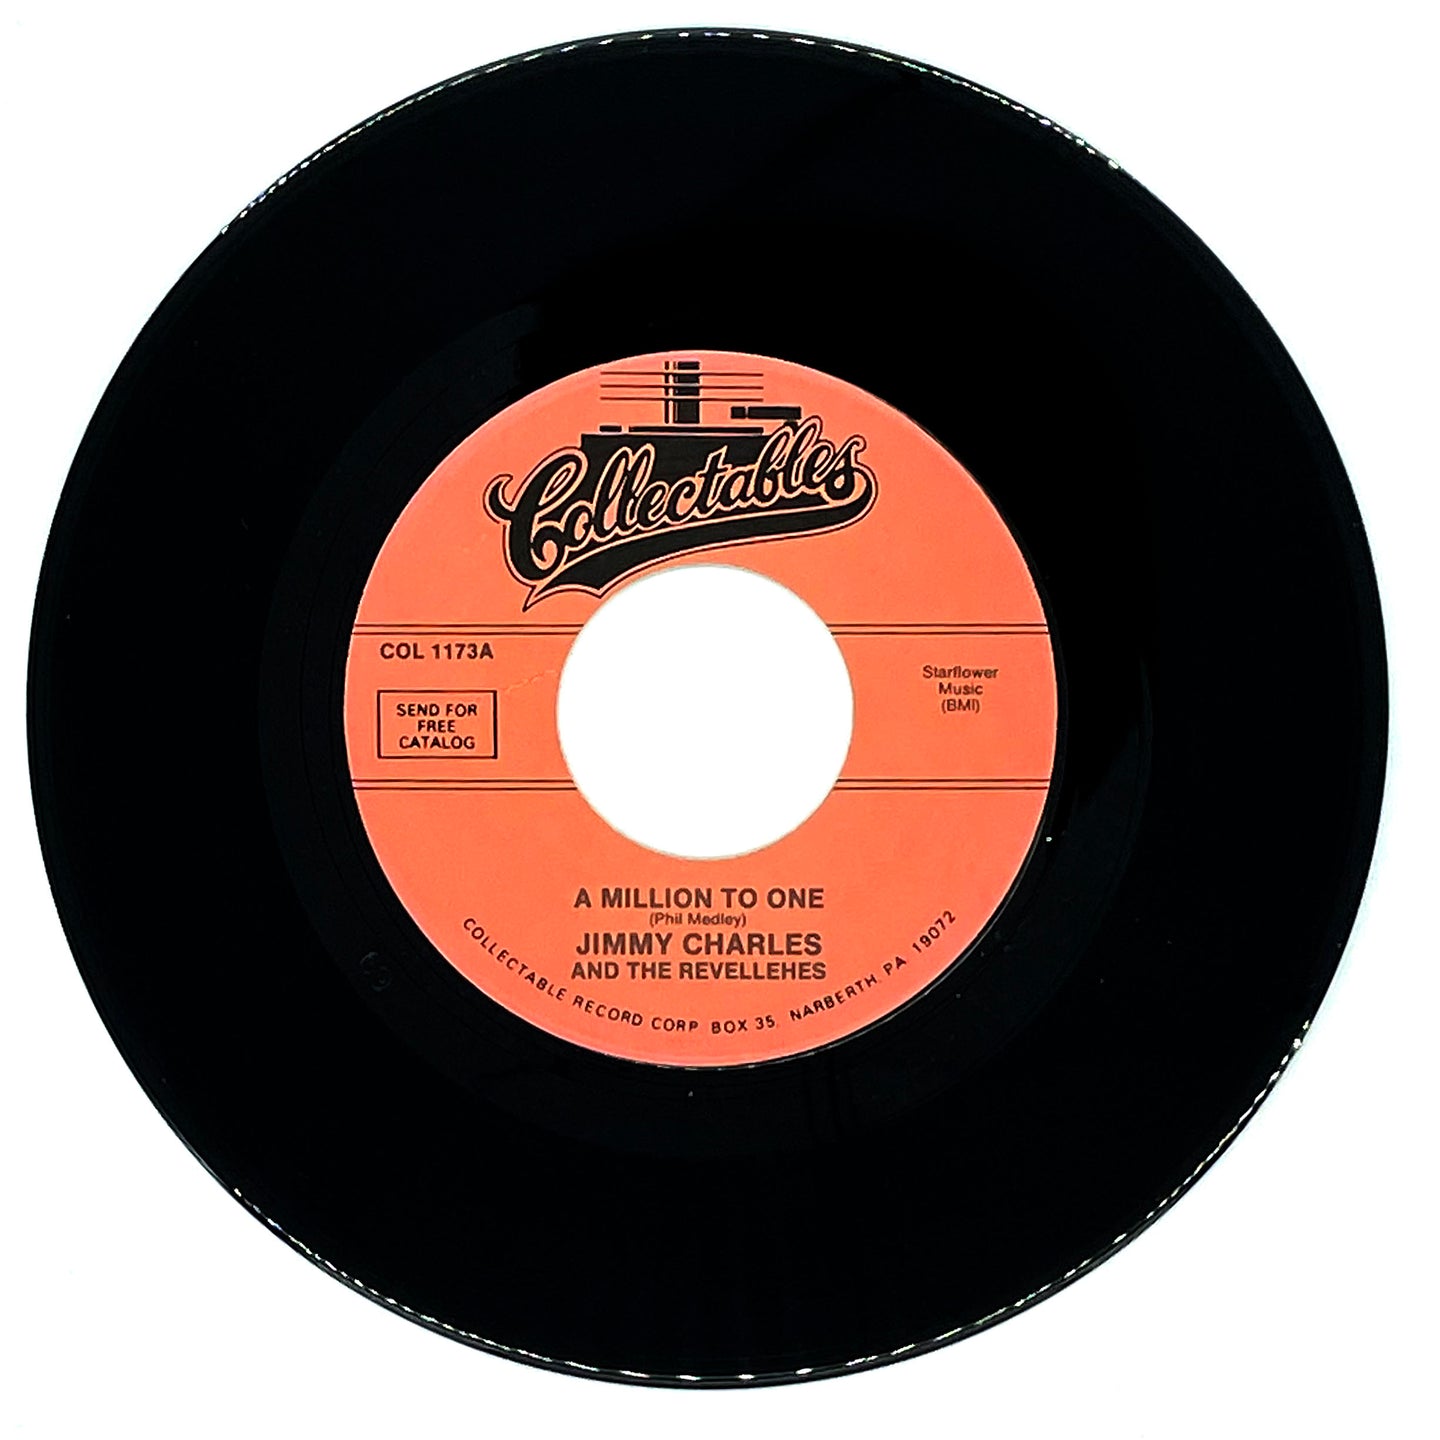 Jimmy Charles + The Revellettes : A MILLION TO ONE/ HOP SCOTCH HOP